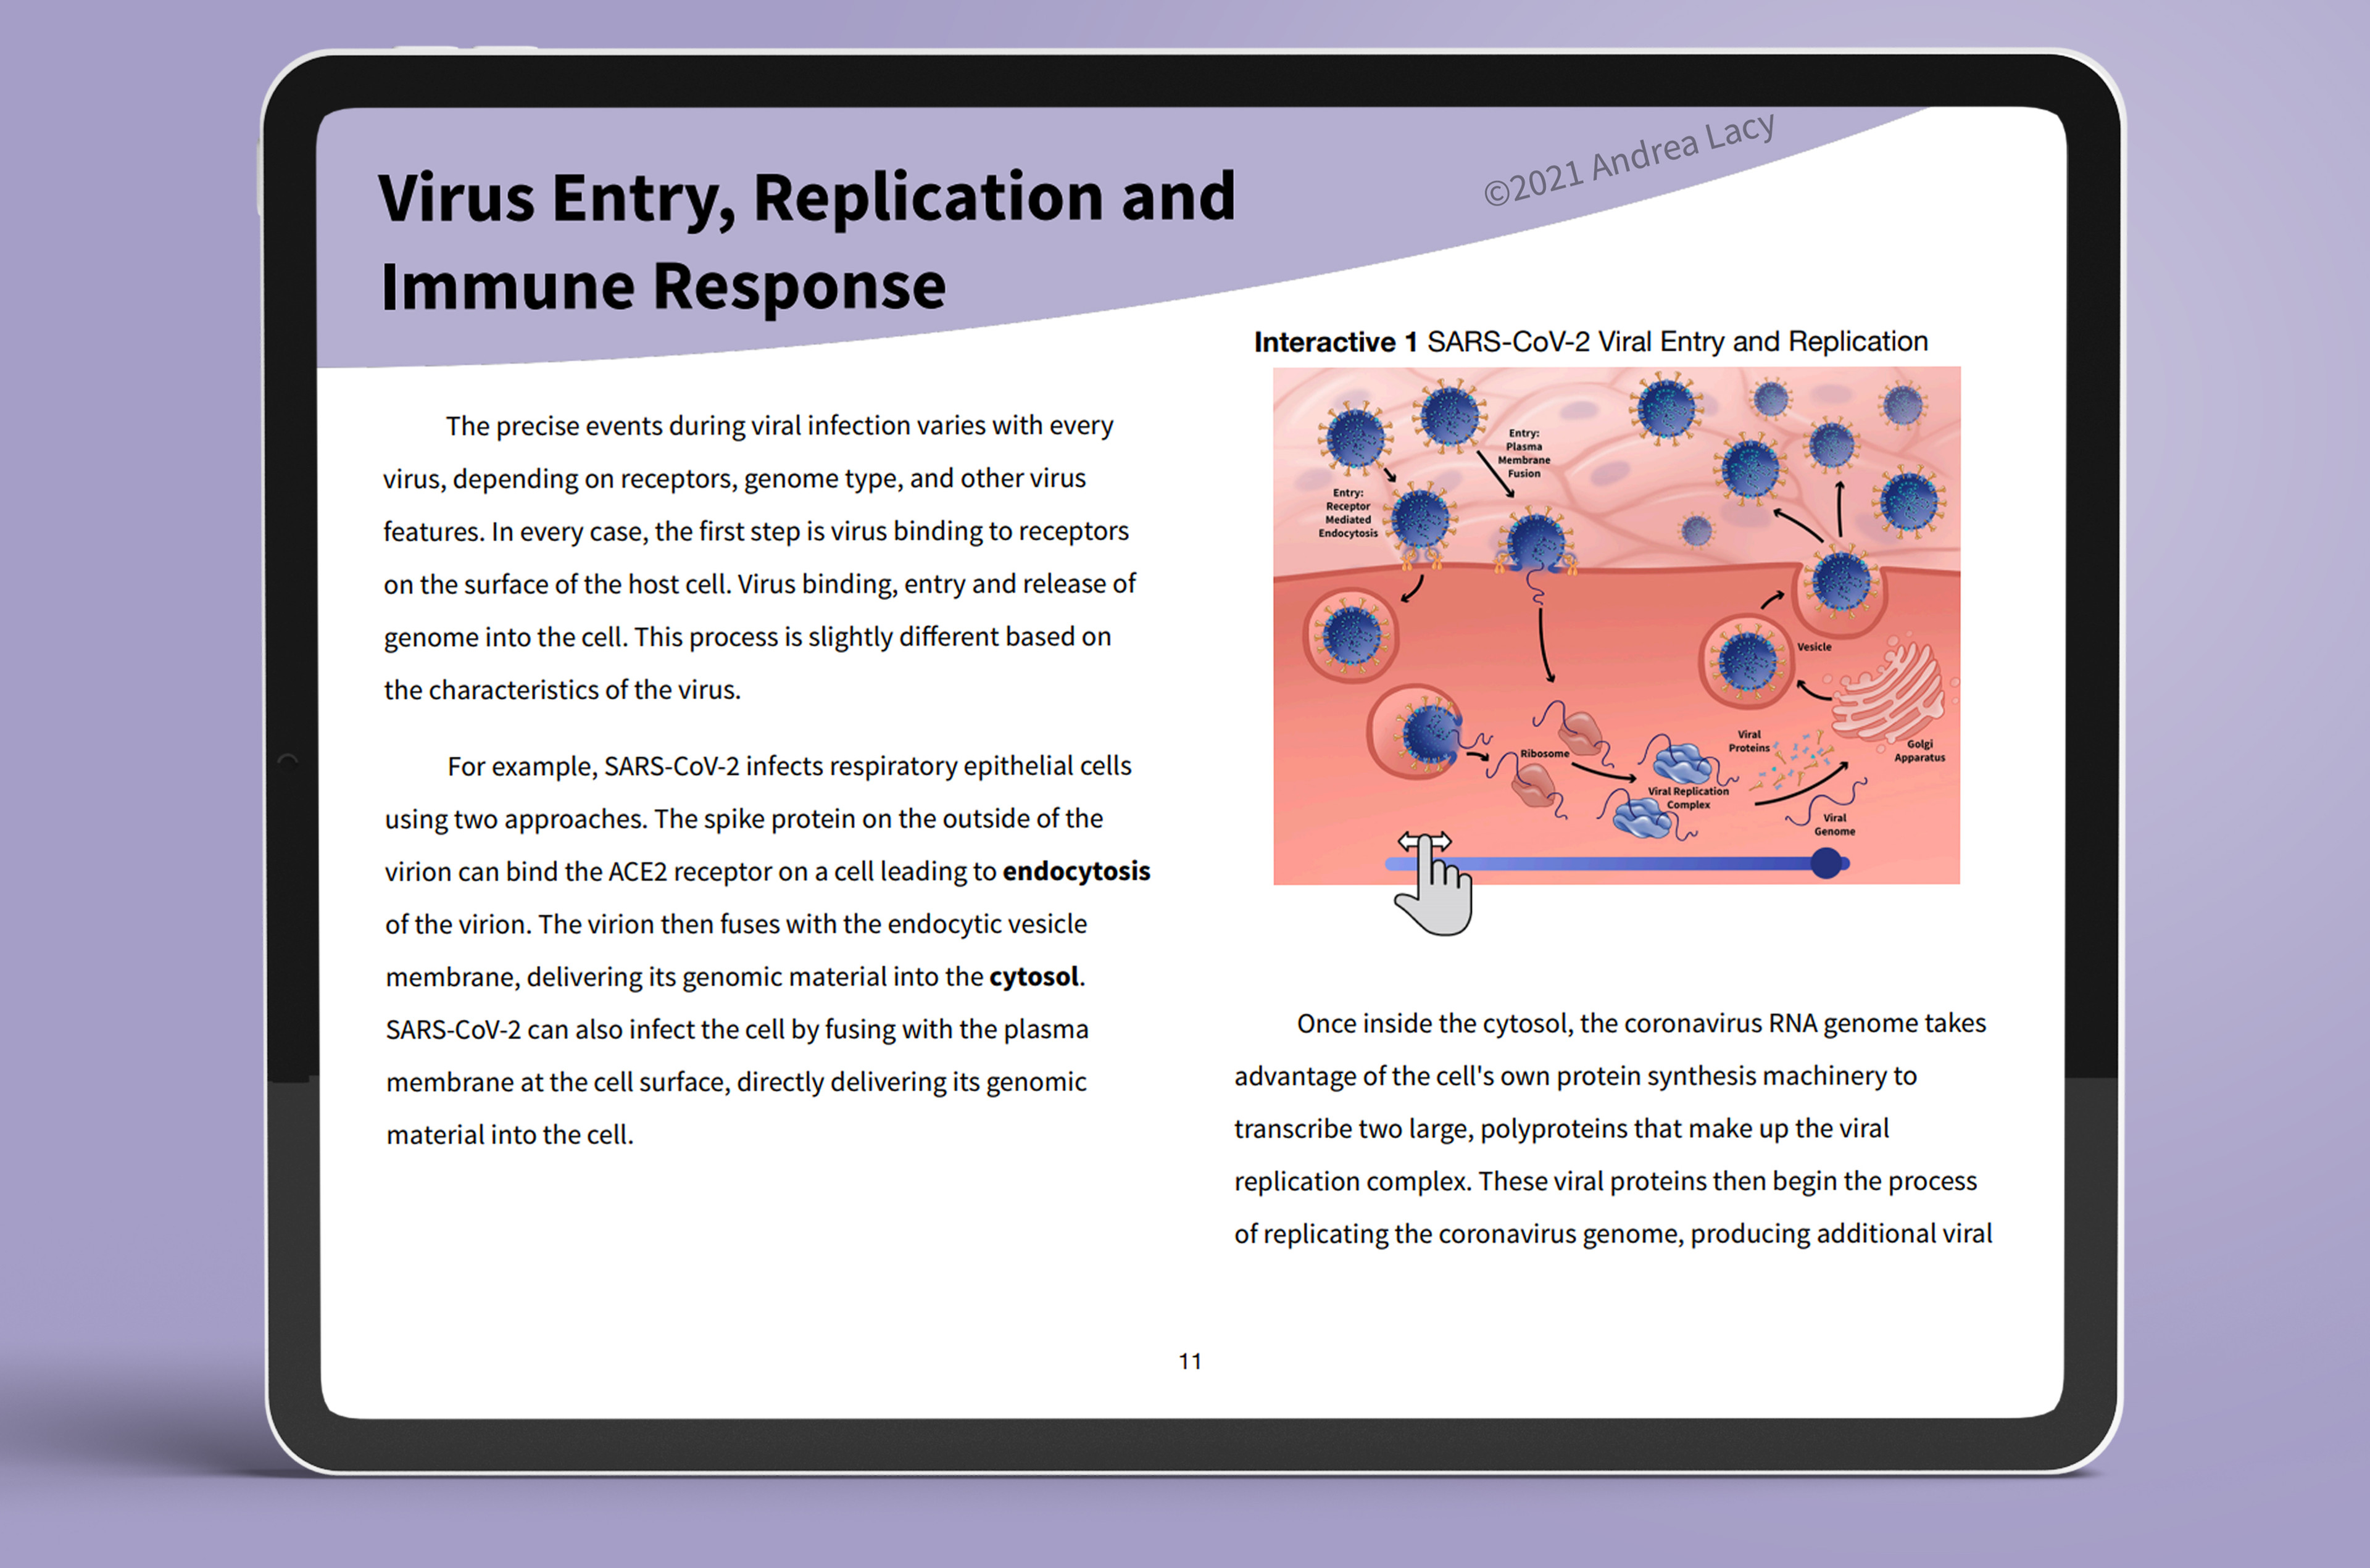 Section 4 describes the life cycle of SARS-CoV-2 and includes two interactive slider animations. 